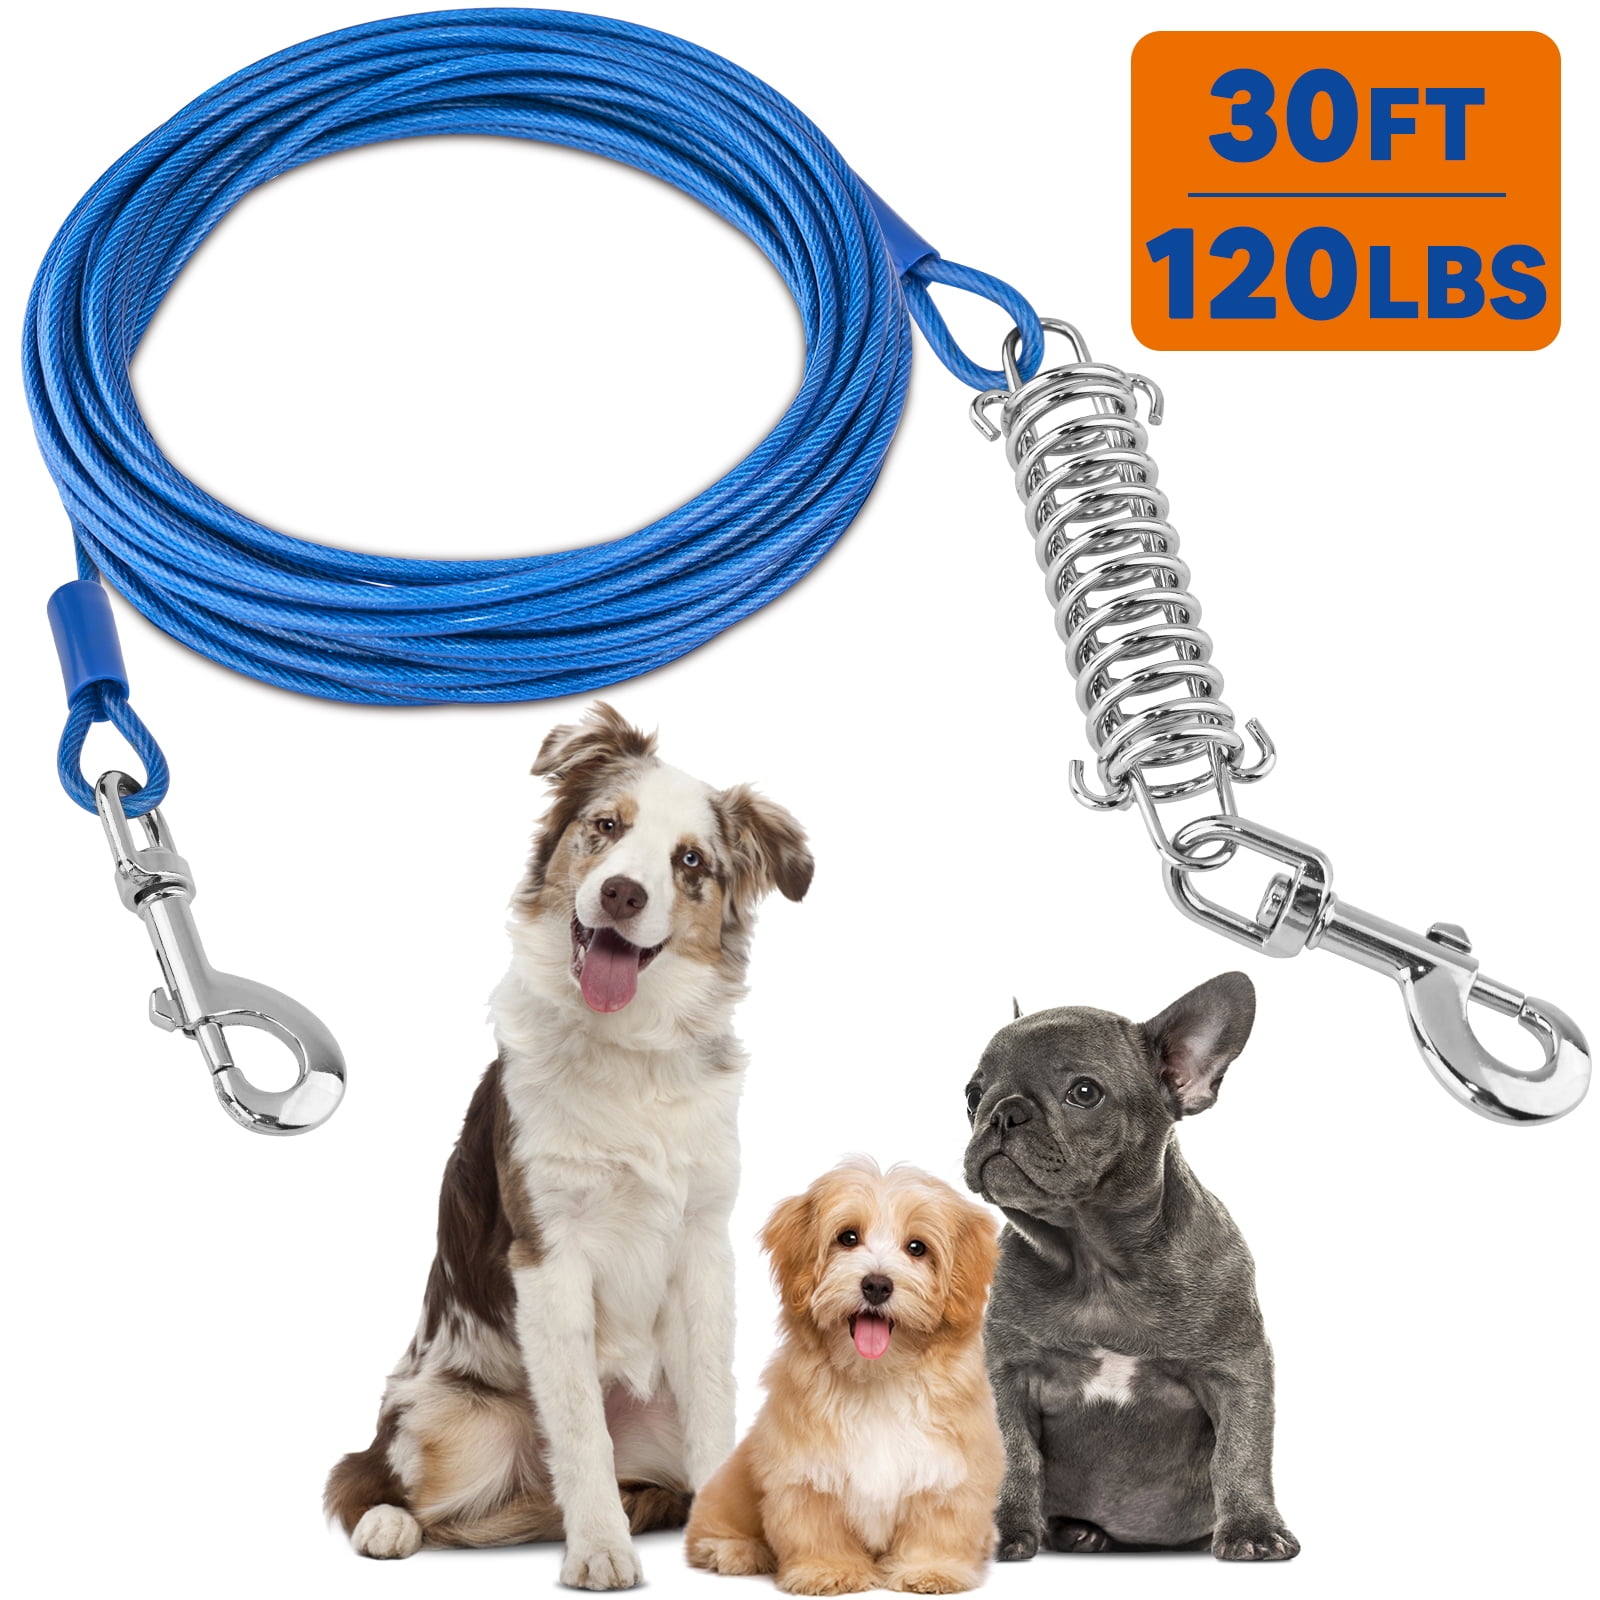 Heavy Duty Rotatable Hook for Yard and Camping Outdoor Training Leash for Dogs Up to 250lbs Anti-rust Dog Chains for Outside Extra Durable Dog Tie Out Cable with Shock Absorbing Spring 30ft 